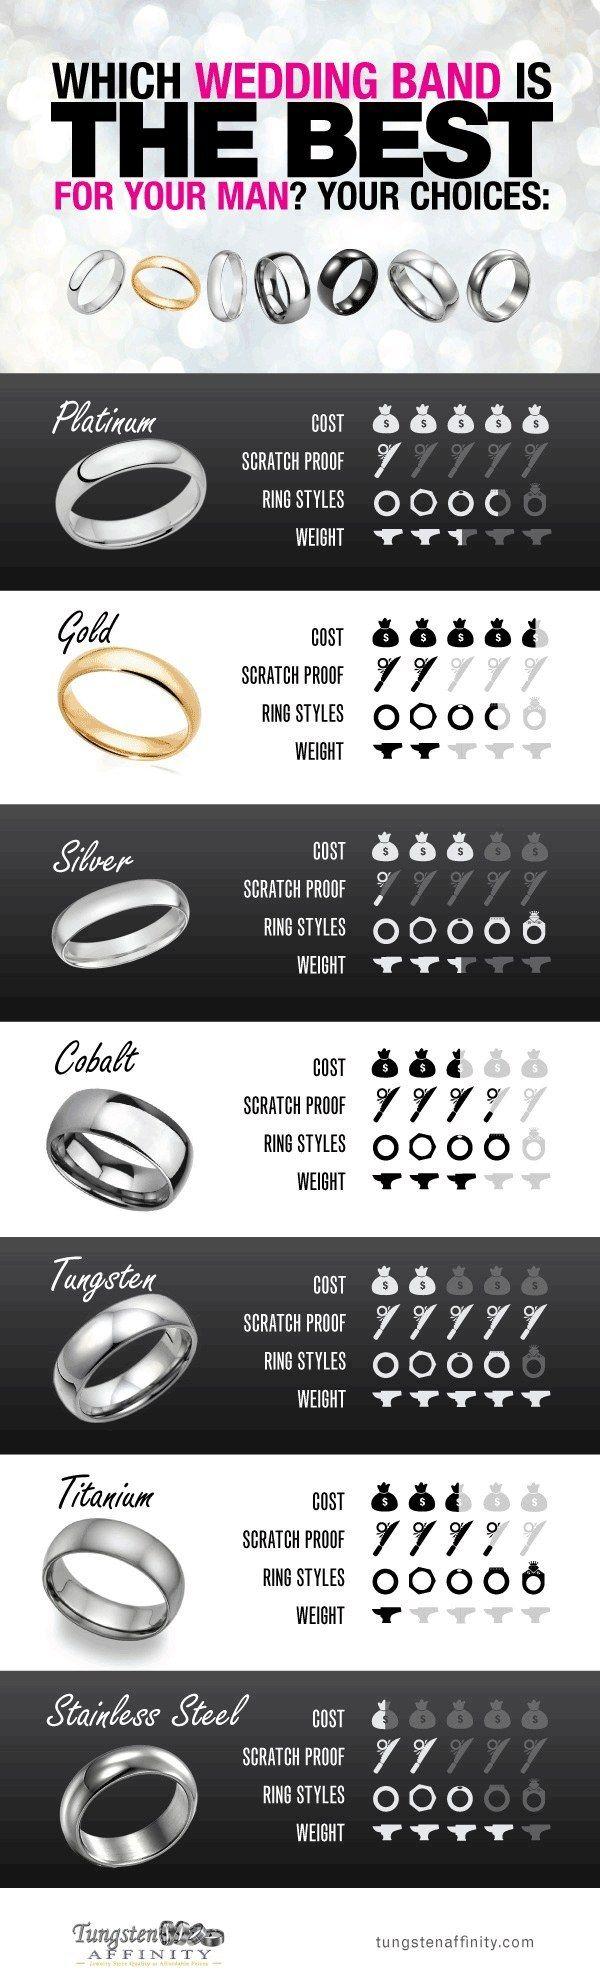 Mariage - 19 Engagement Ring Diagrams That Will Make Your Life Easier